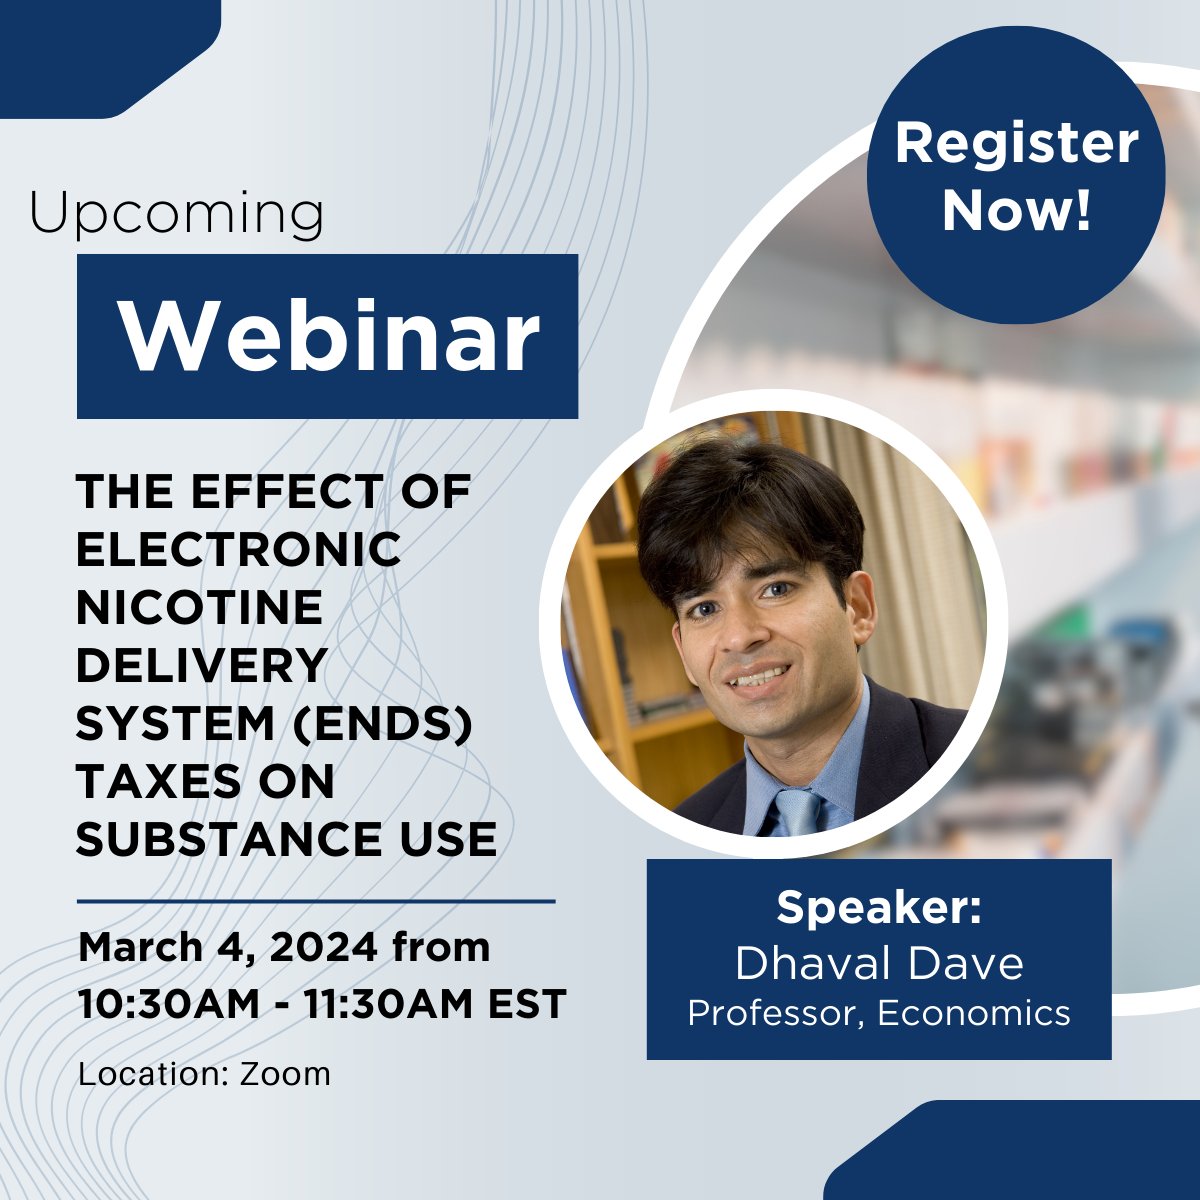 Just a few days left to registe! Join us virtually on March 4th at 10:30 AM EST/3:30pm UTC for an insightful discussion on the impact of ENDS taxes on substance use, a topic that's been raising significant concerns in public health circles. Register now: healtheconomics.org/event/economic…